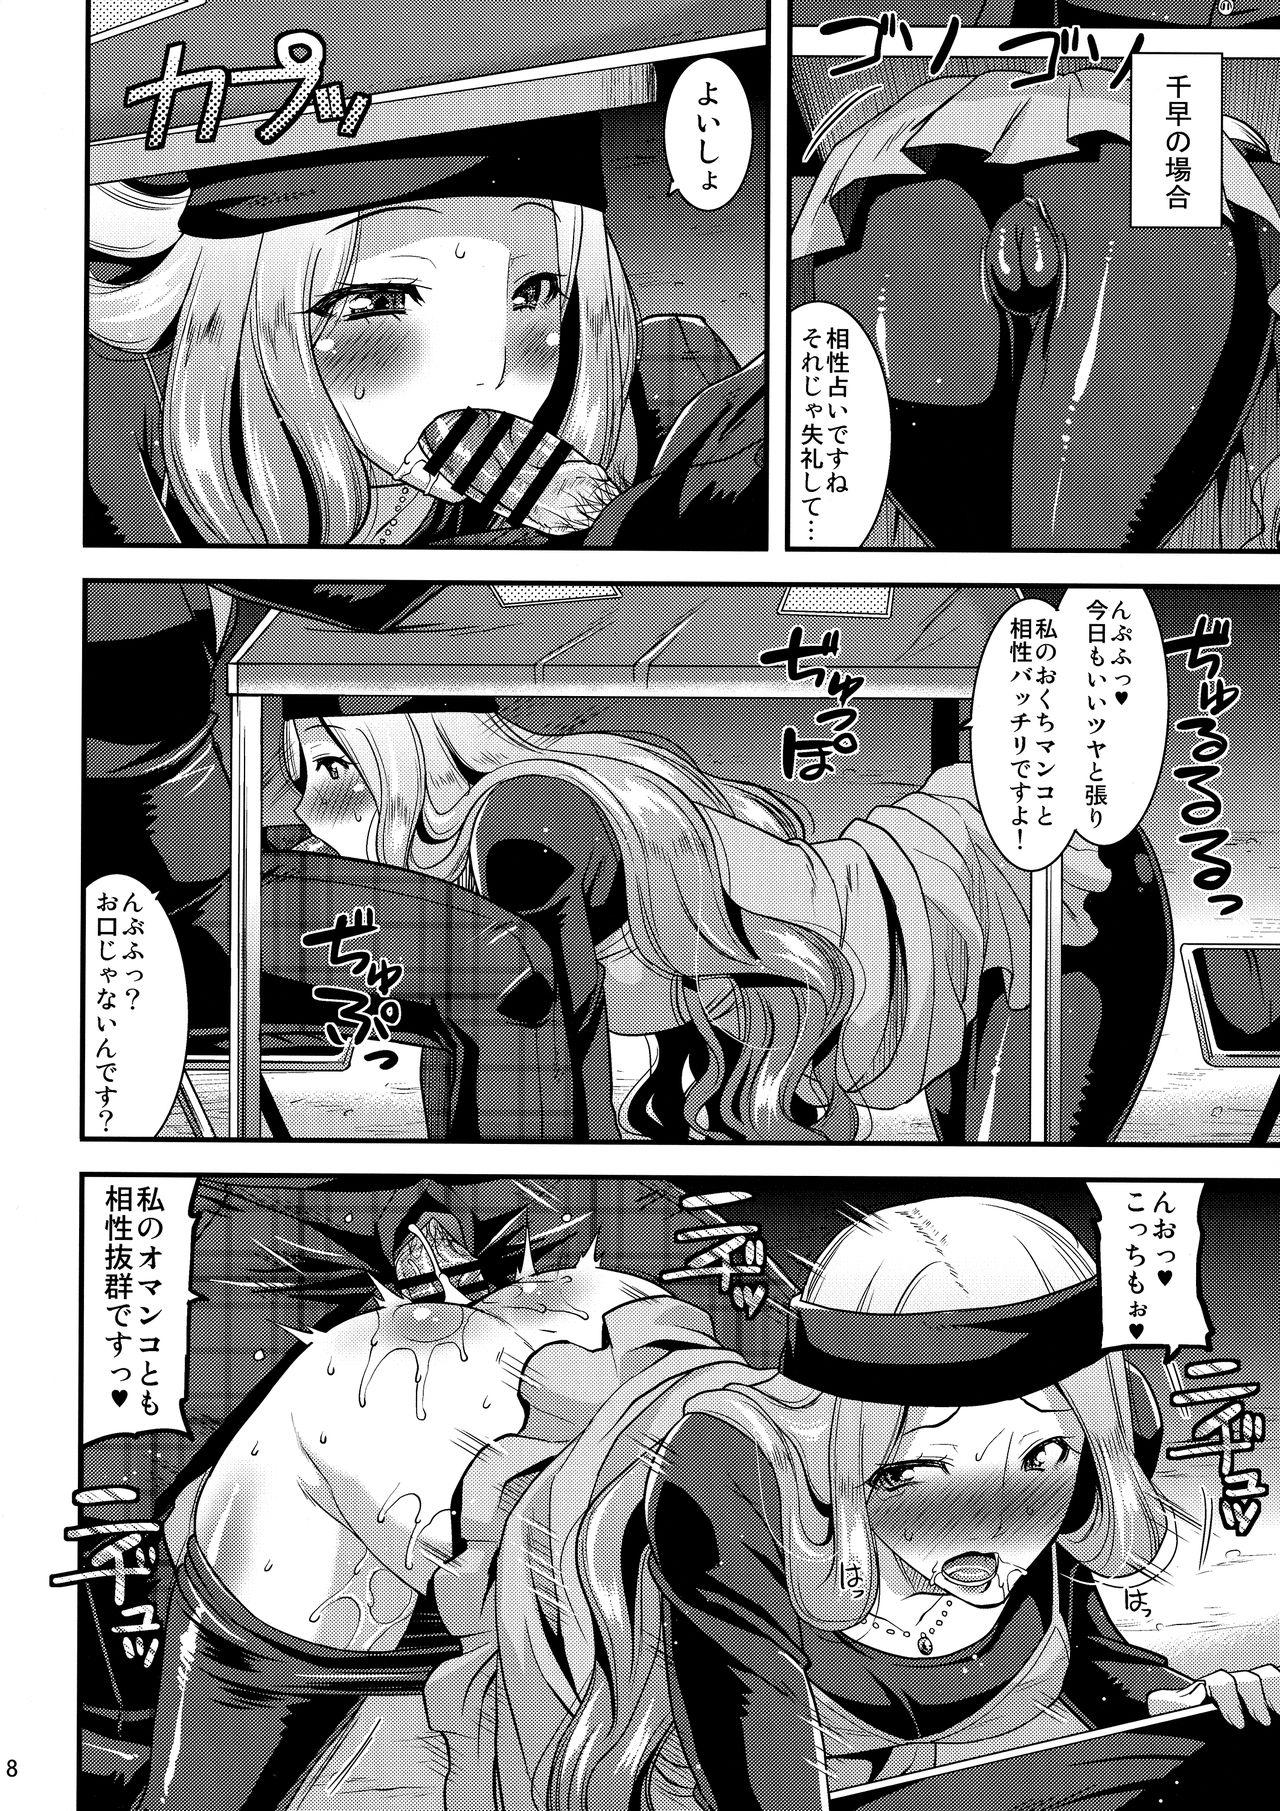 Curves LET US START THE SEX - Persona 5 Eurosex - Page 7